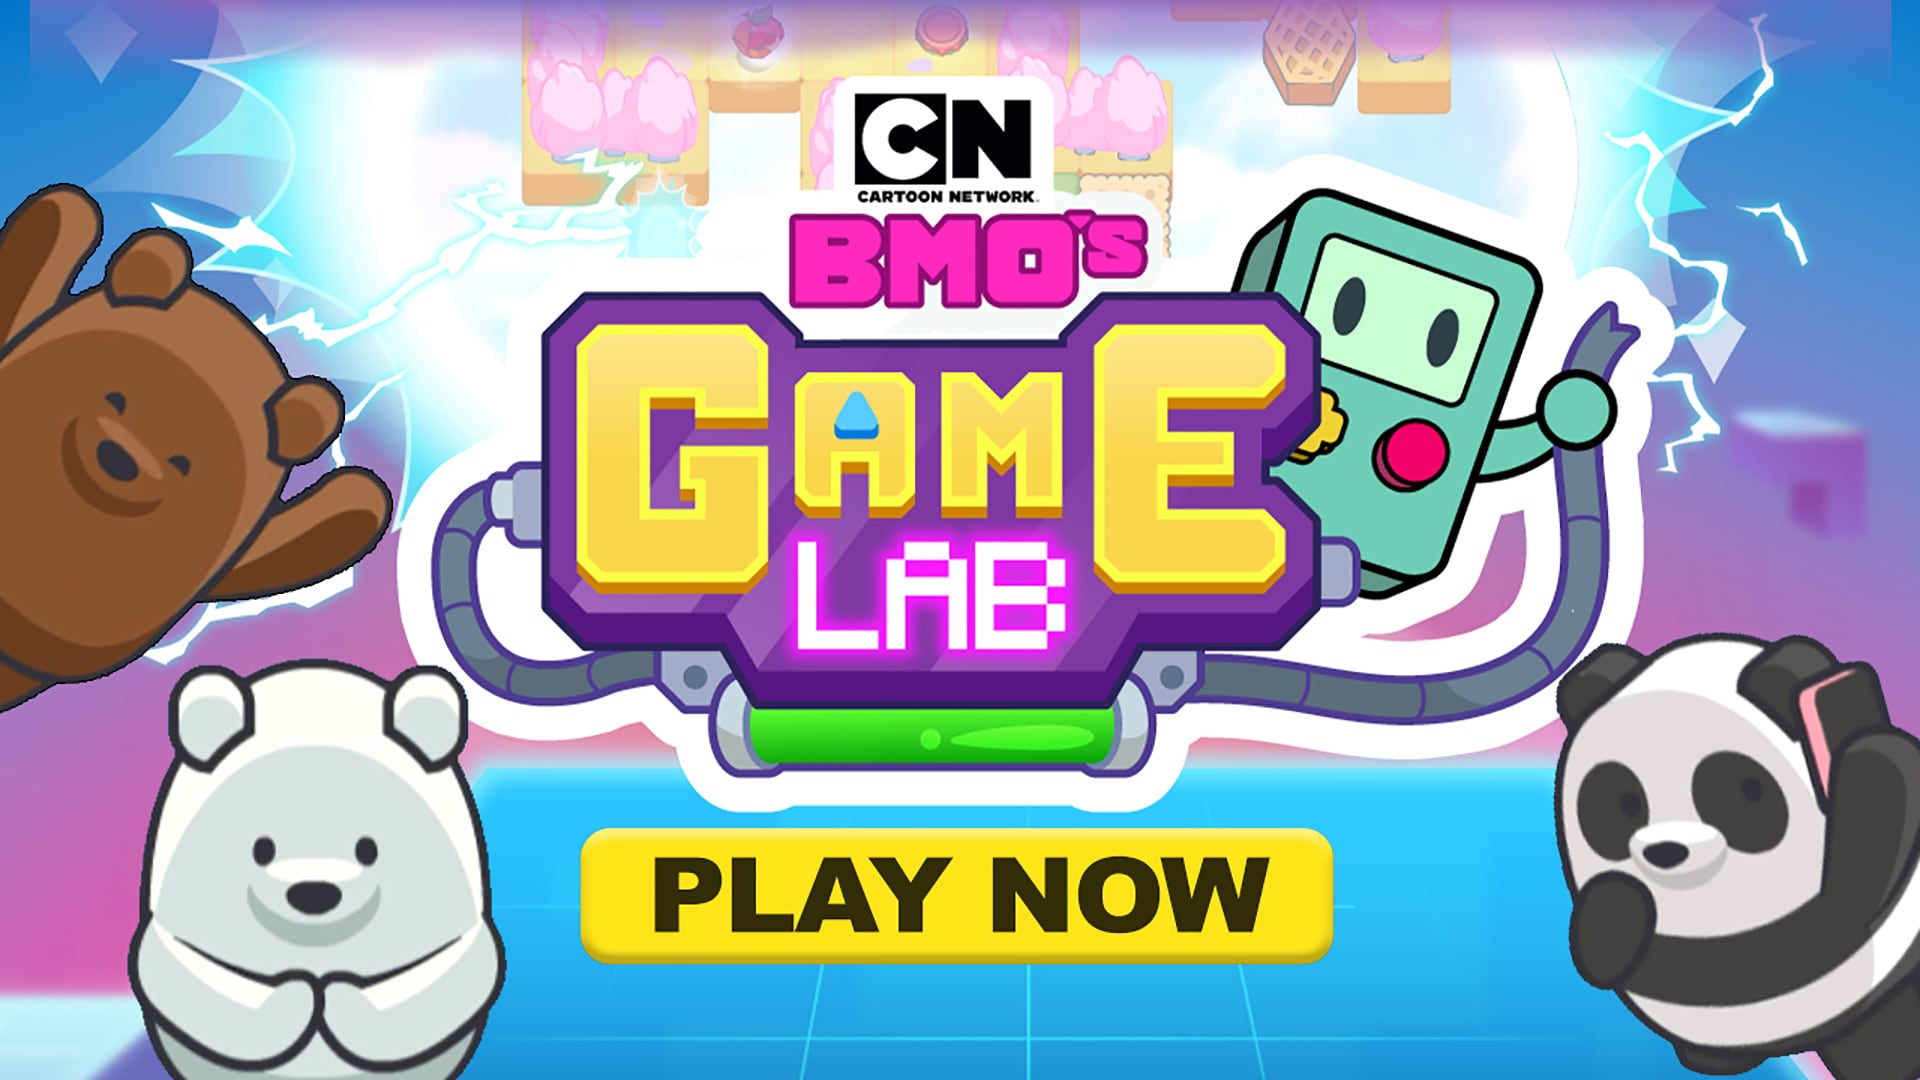 Game Home | Free online games and video | Cartoon Network